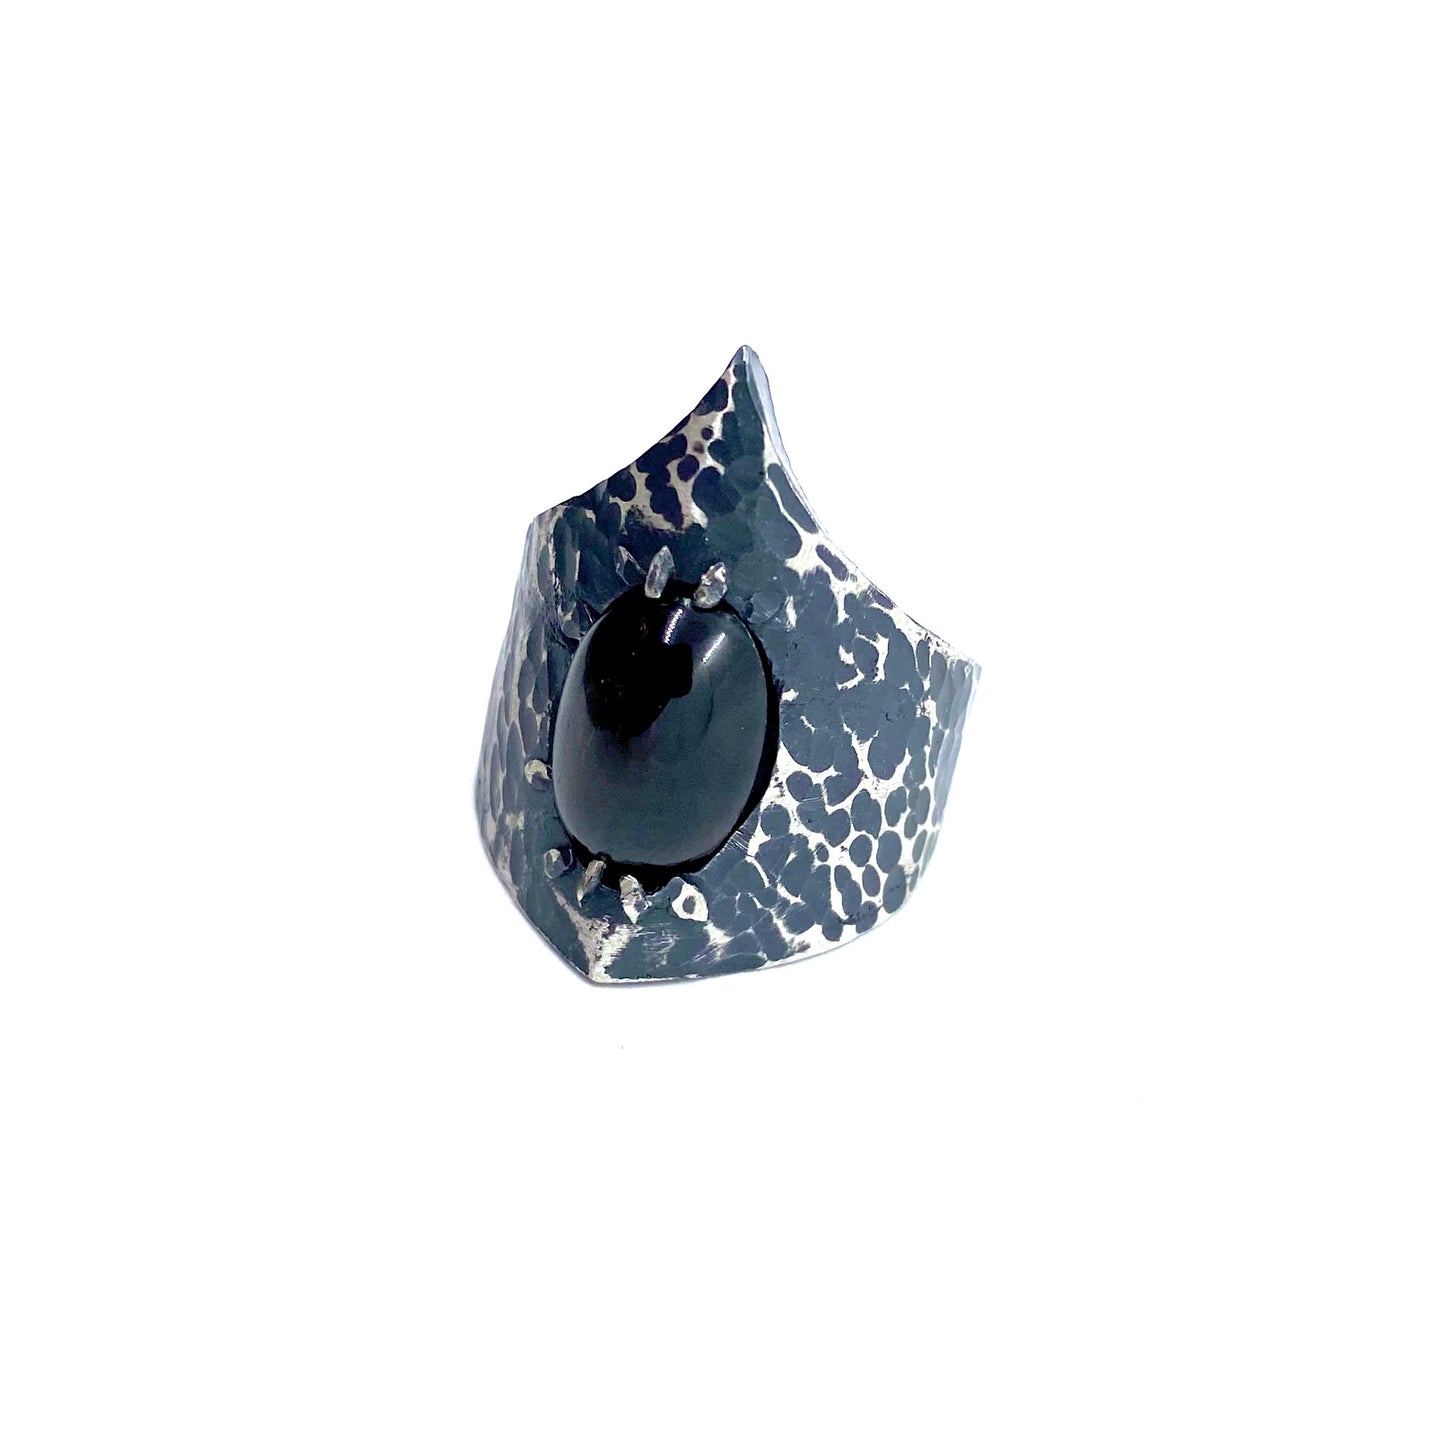 Thornguard’s Ring Black Star in Sterling silver